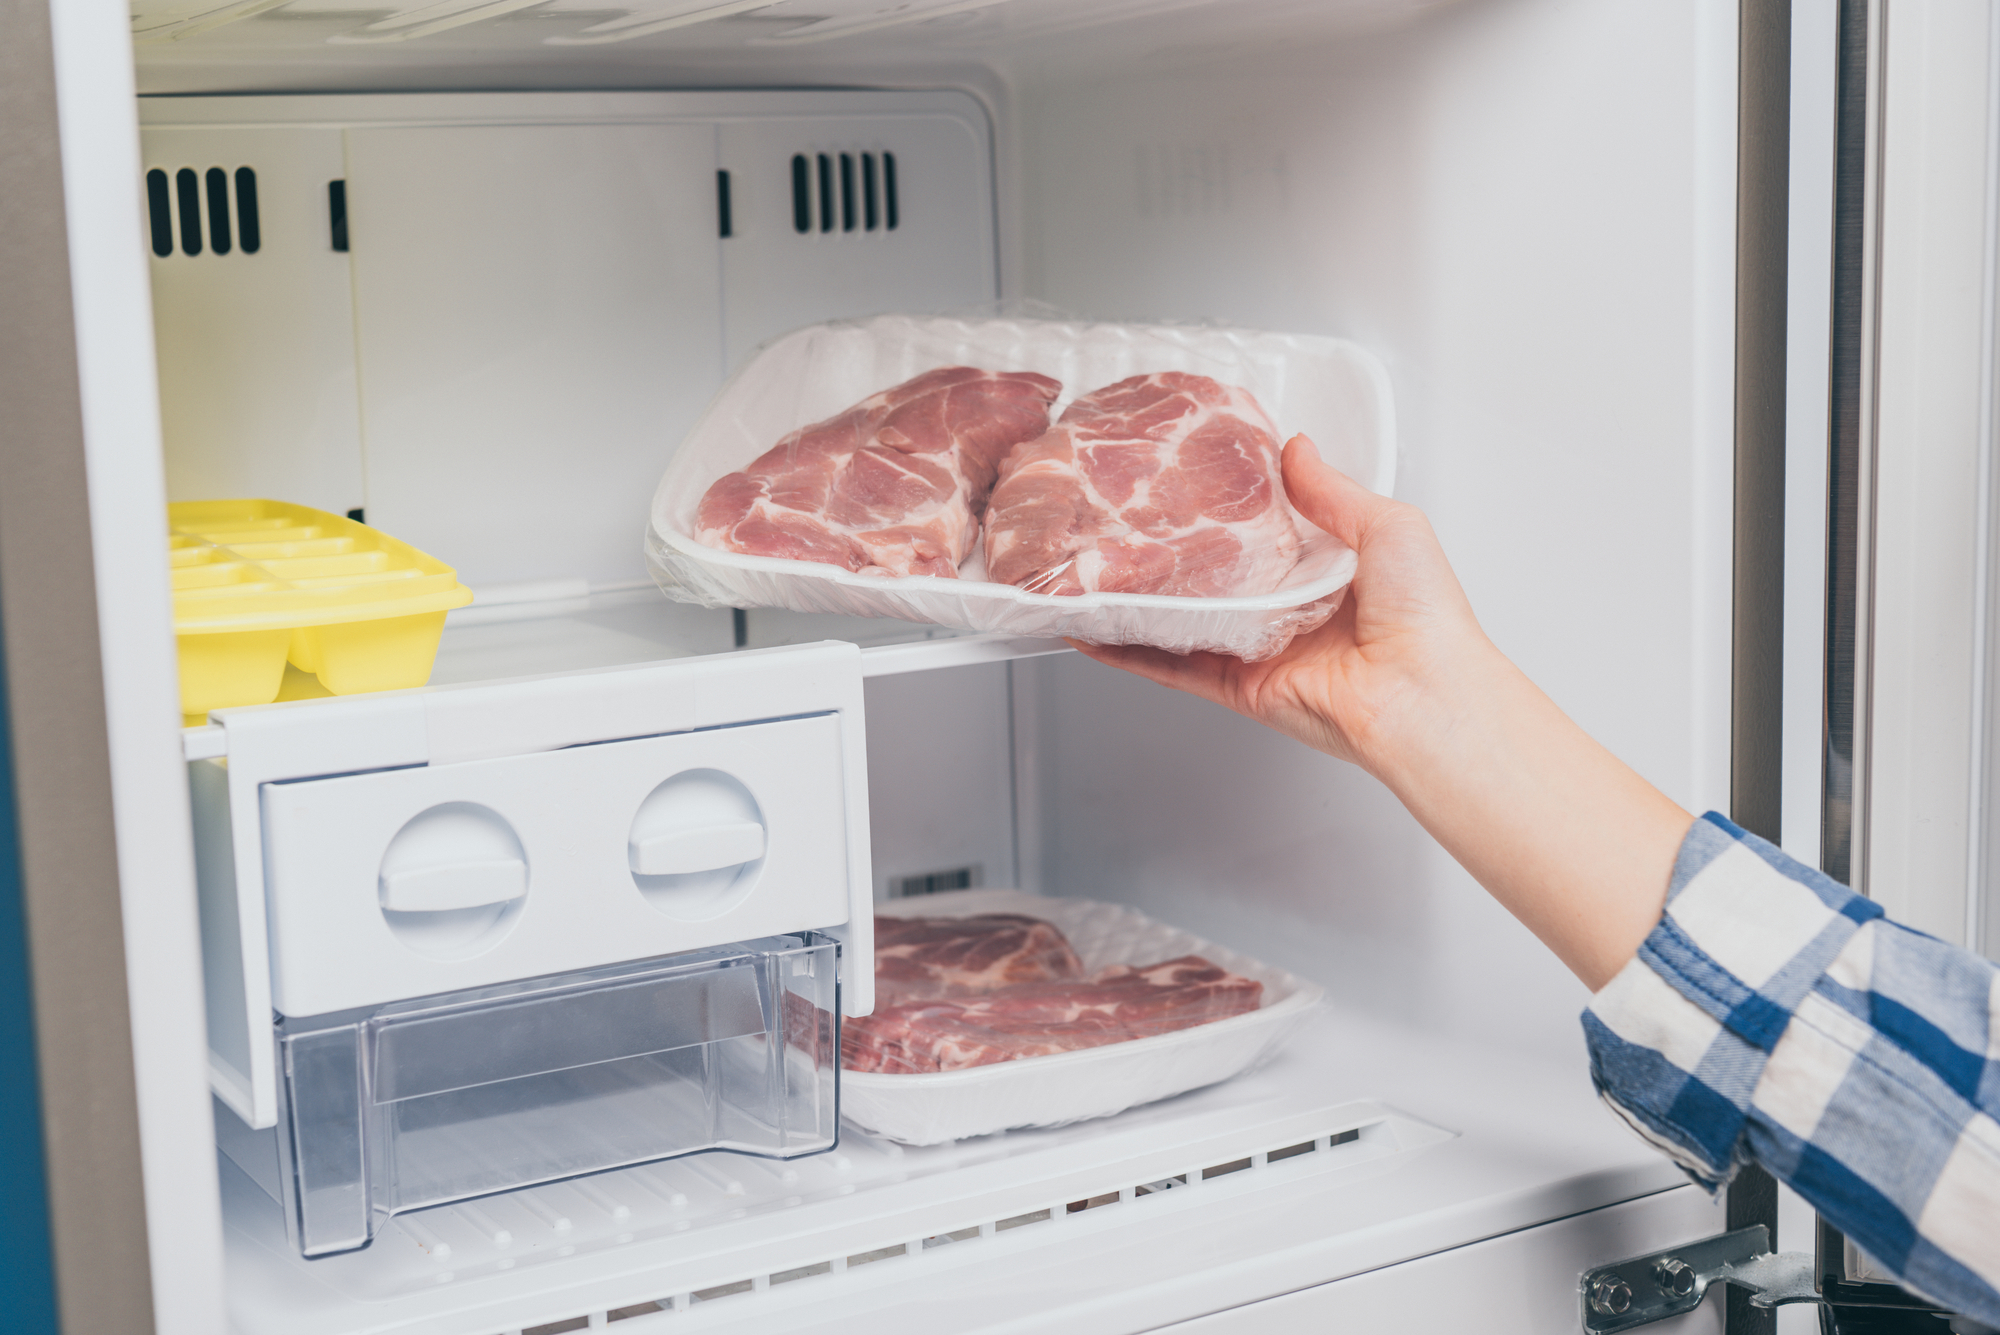 <p>If you don’t have immediate plans to prepare or consume your meat, it’s a smart move to freeze it. Uncooked meats can be safely stored in the freezer for several months, depending on the cut. This not only extends their shelf life but also frees up valuable space in your refrigerator.</p>